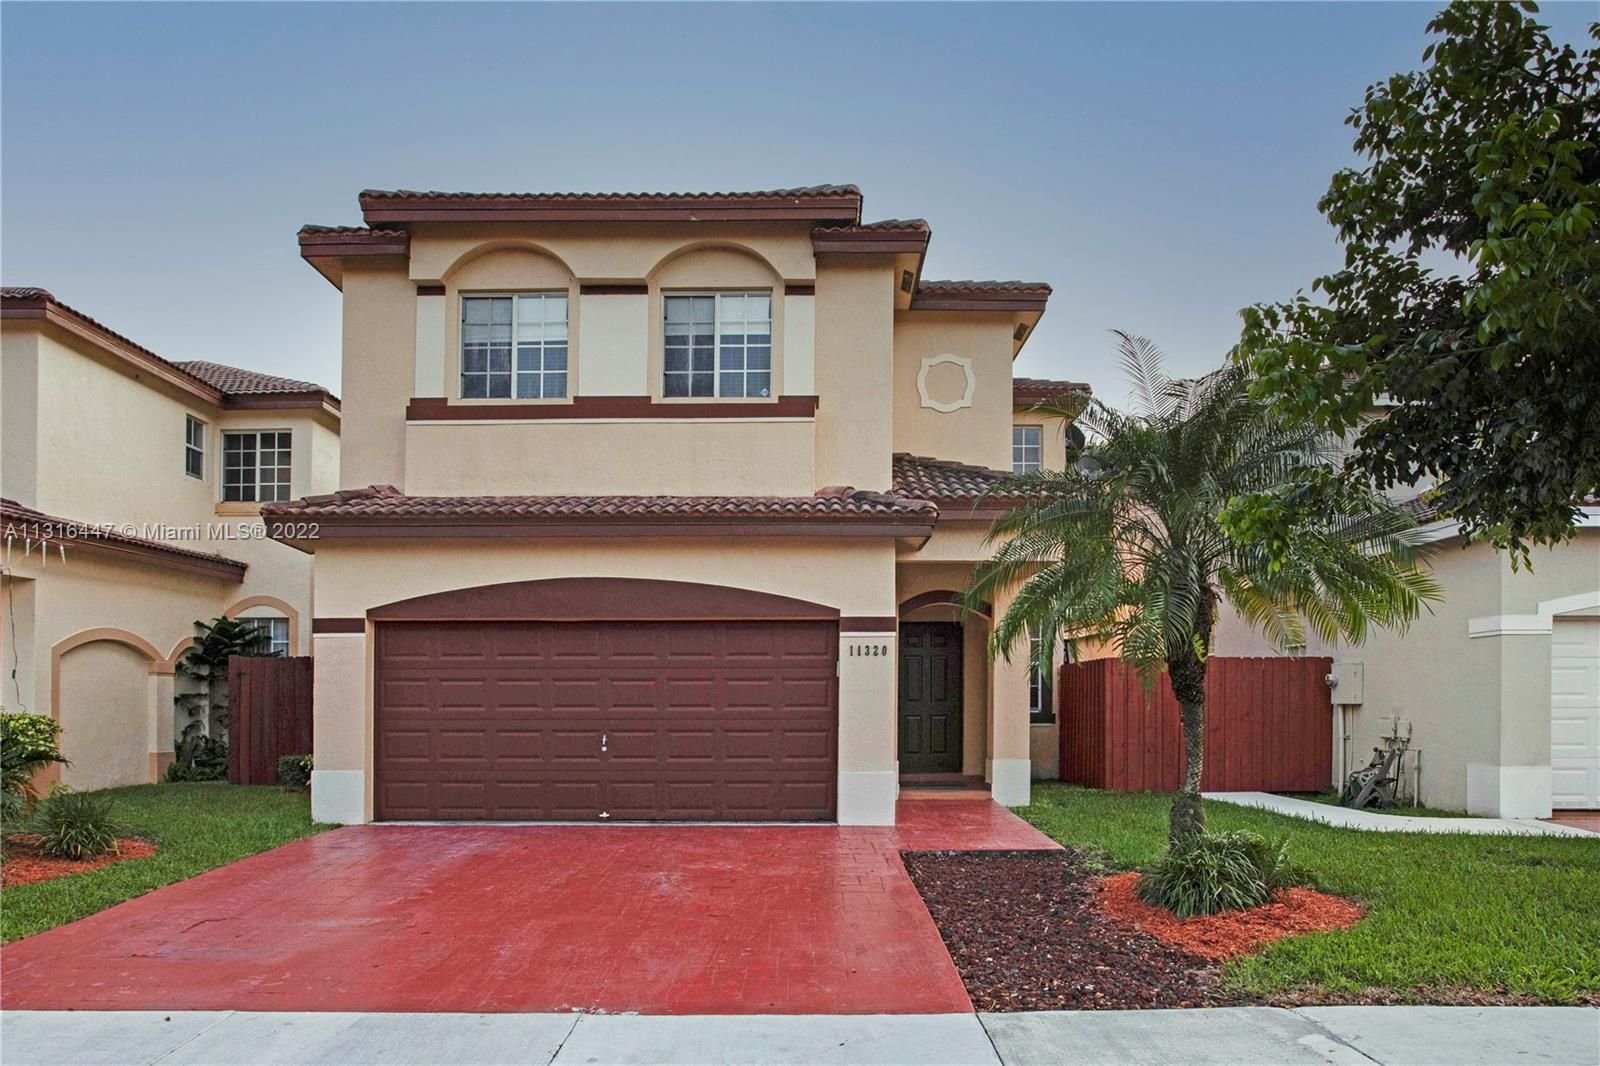 Real estate property located at 11320 43rd Ter, Miami-Dade County, Doral, FL